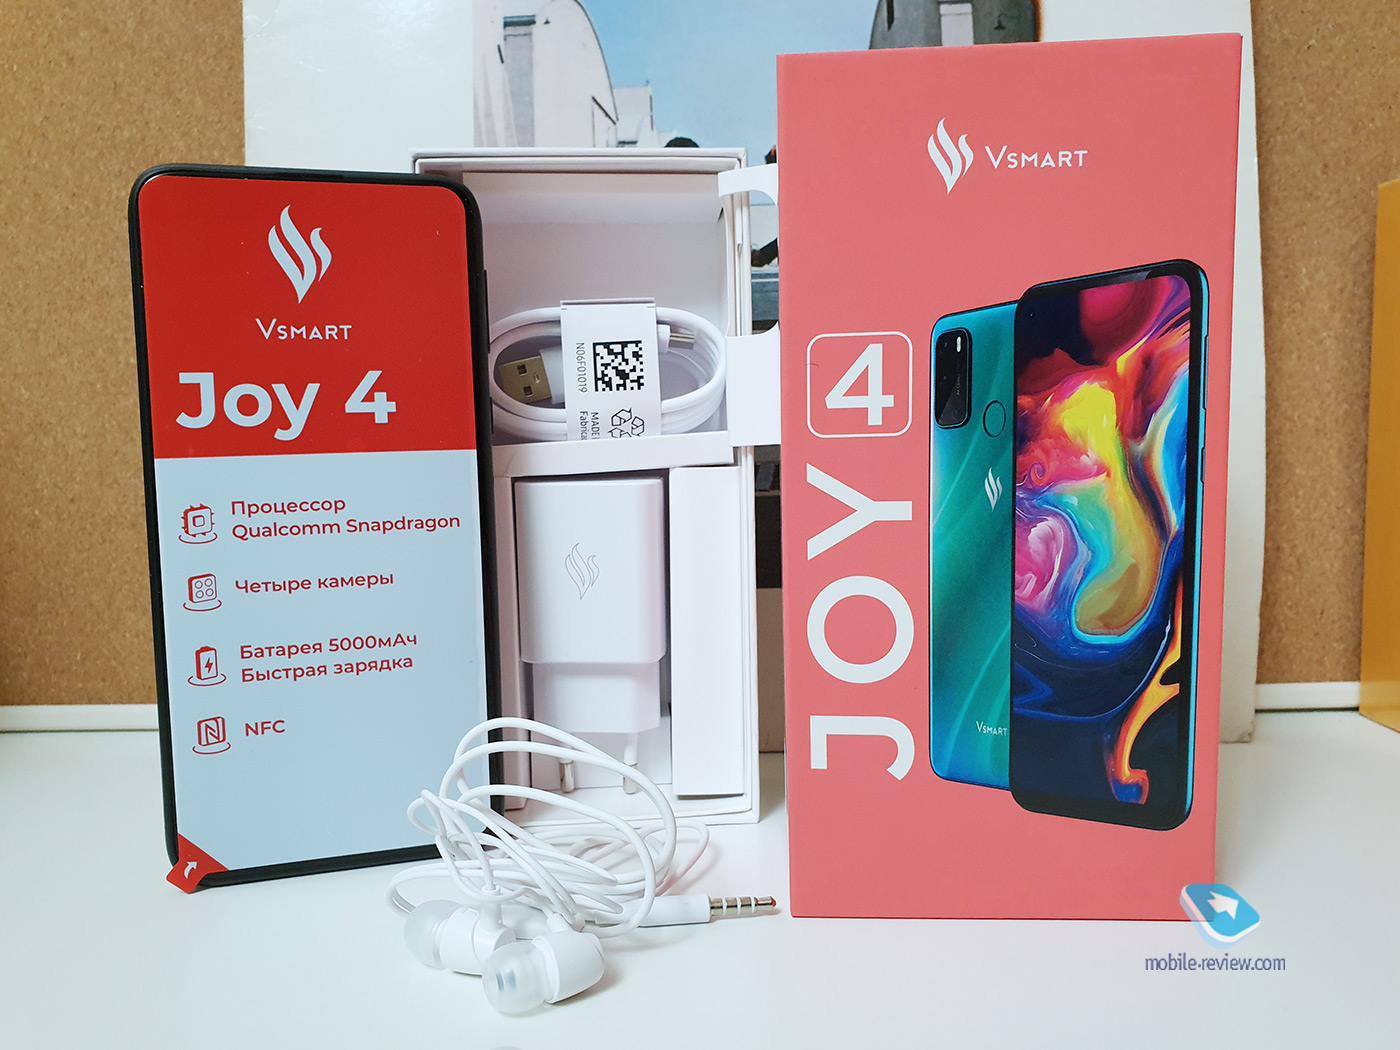 Vsmart Joy 4 review: NFC and Snapdragon 665 for 10 rubles